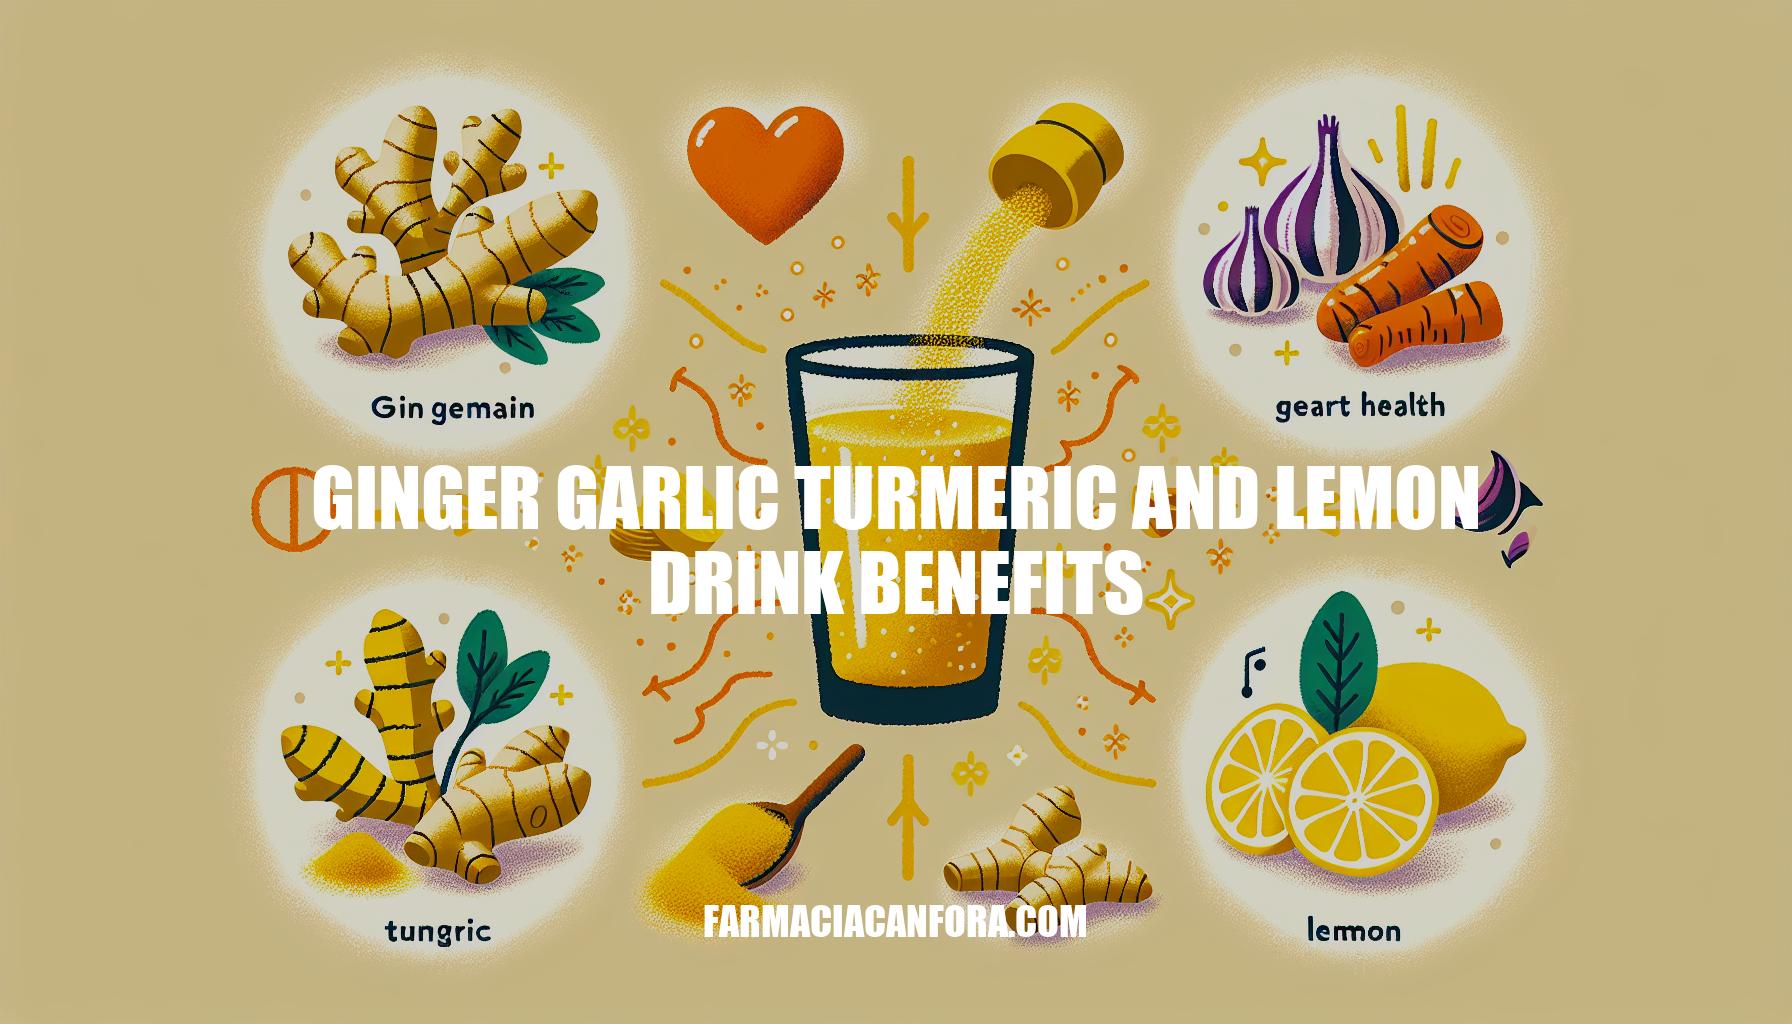 Discover the Benefits of Ginger Garlic Turmeric and Lemon Drink